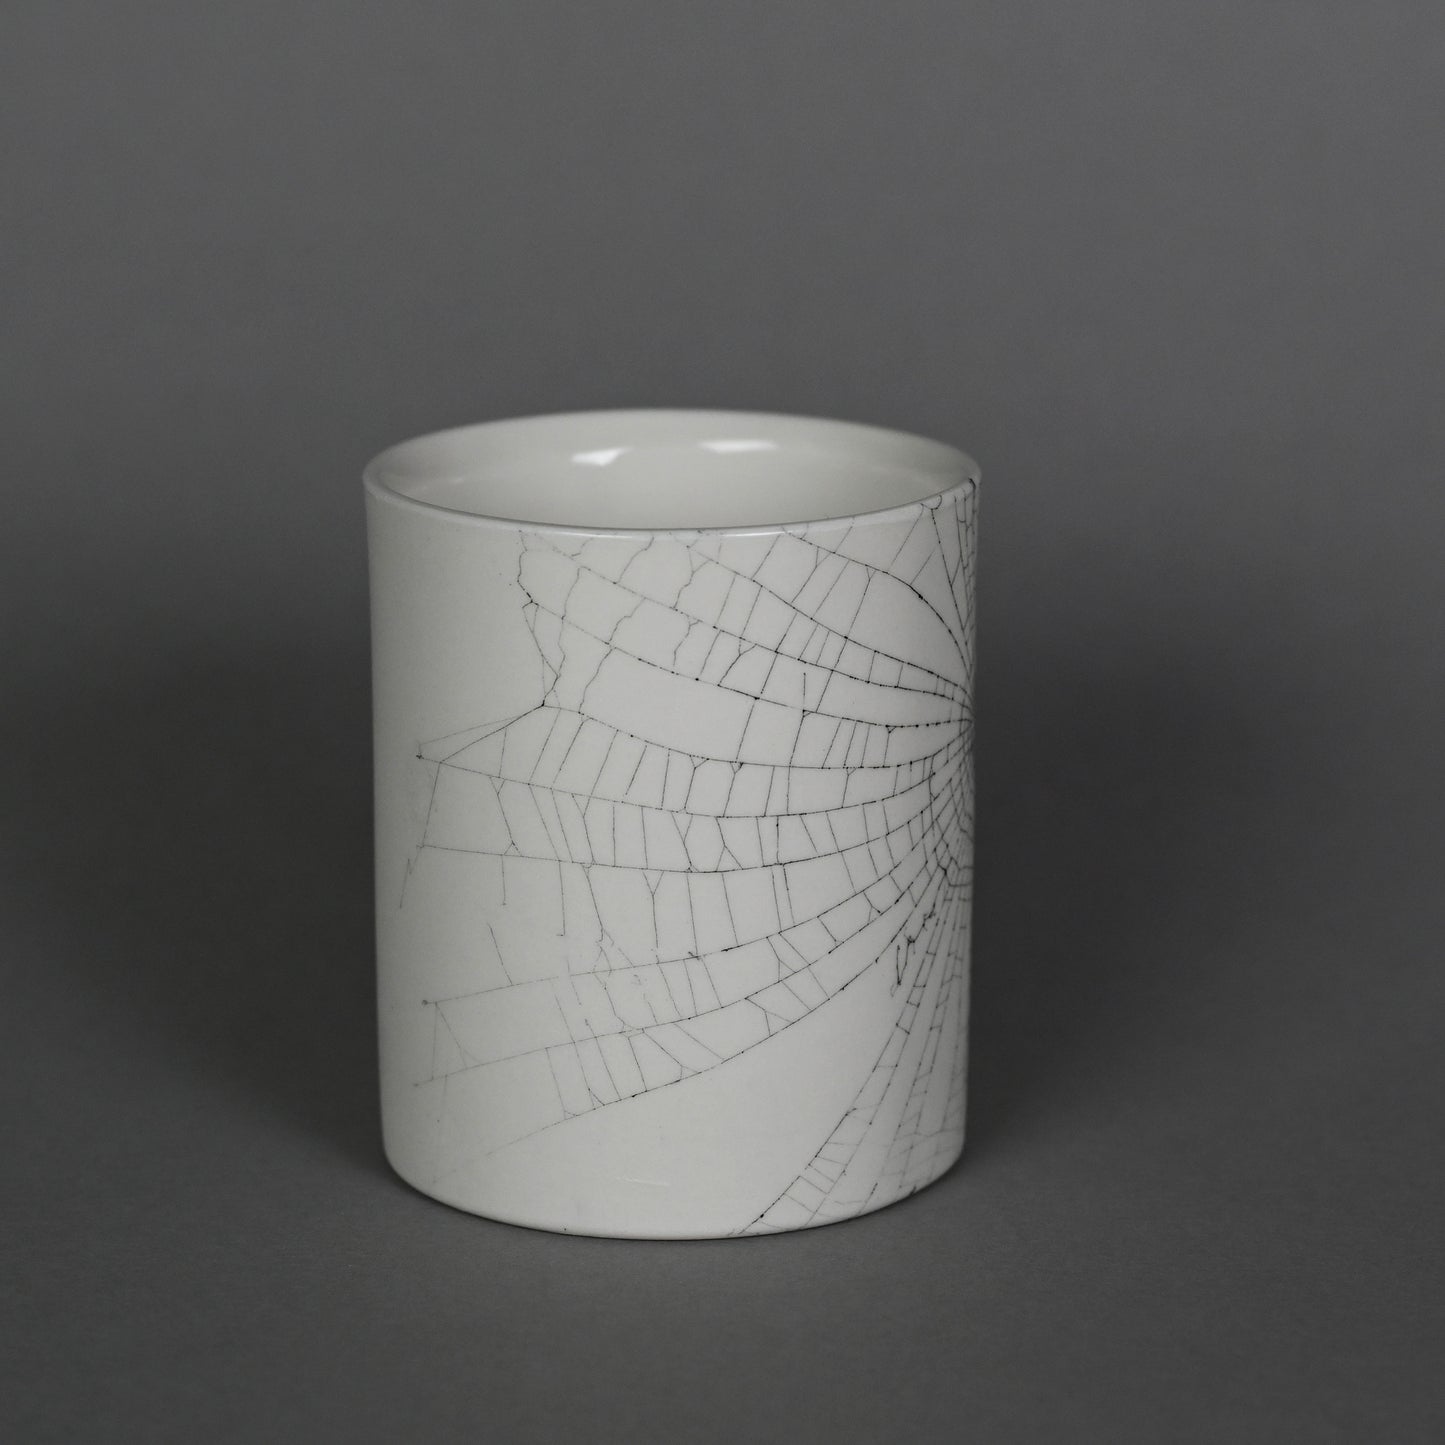 Web on Clay (209), Collected September 30, 2022